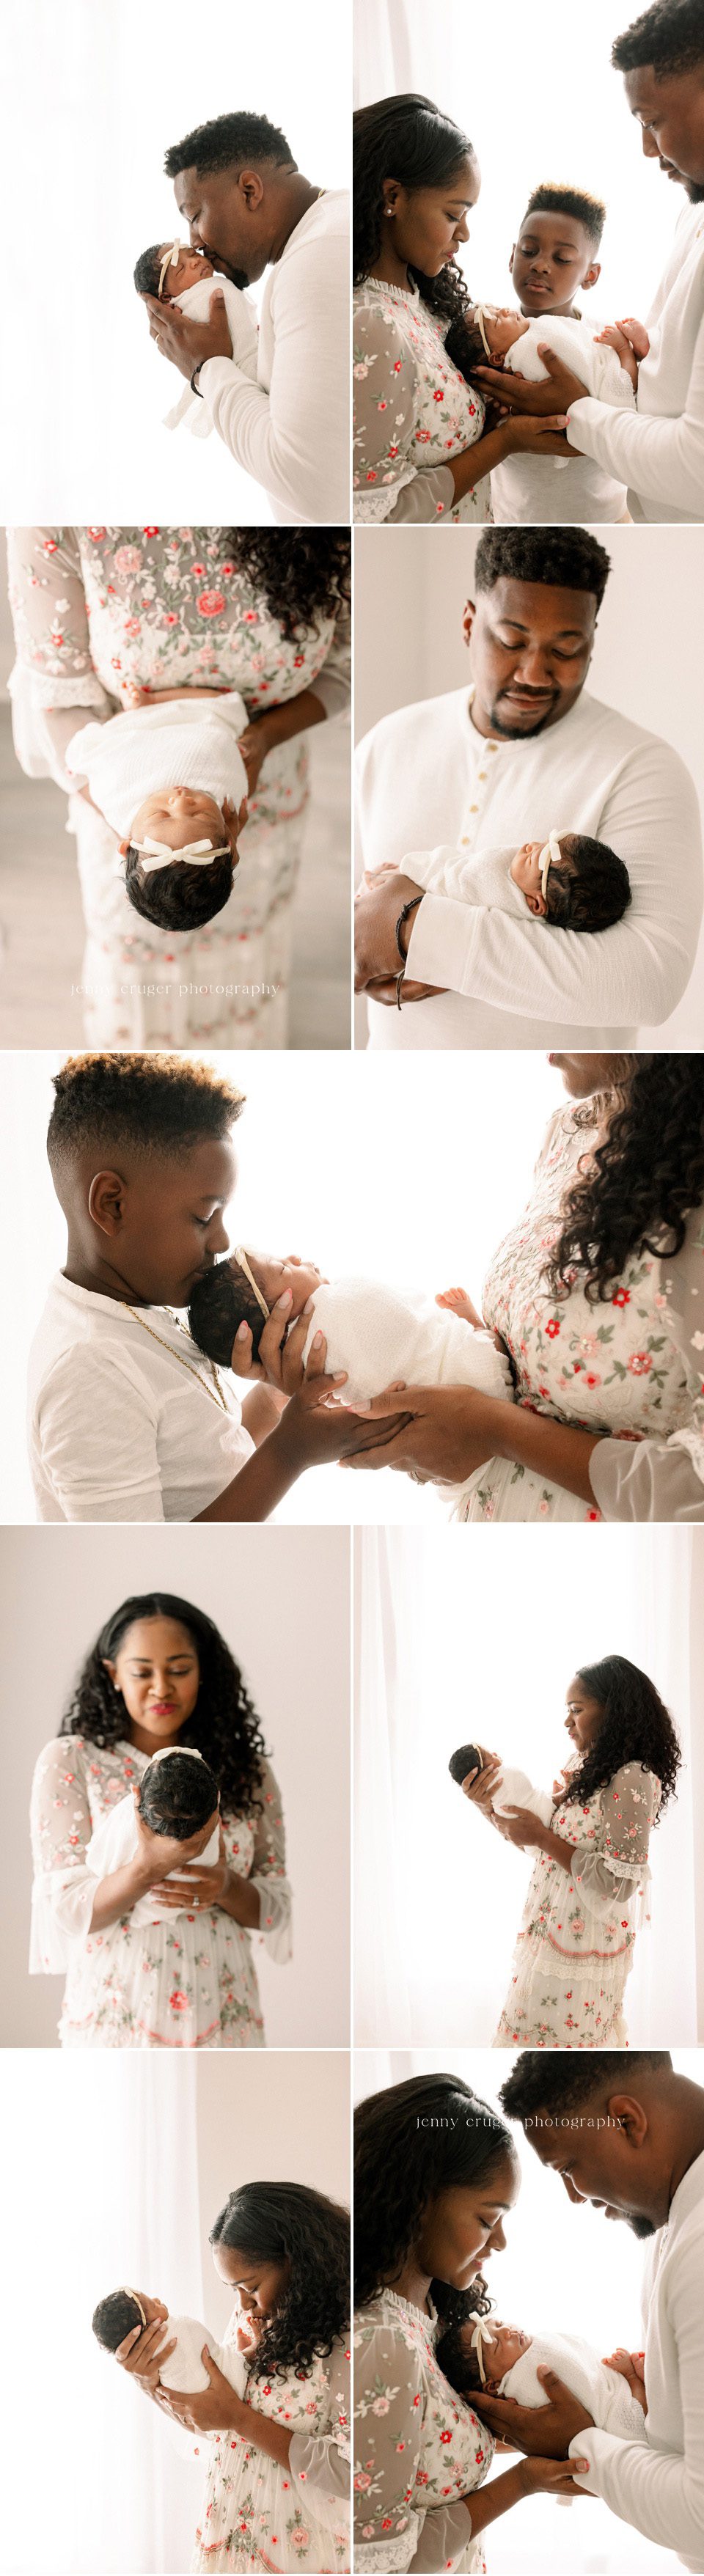 backlit family newborn images with mom in a floral dress